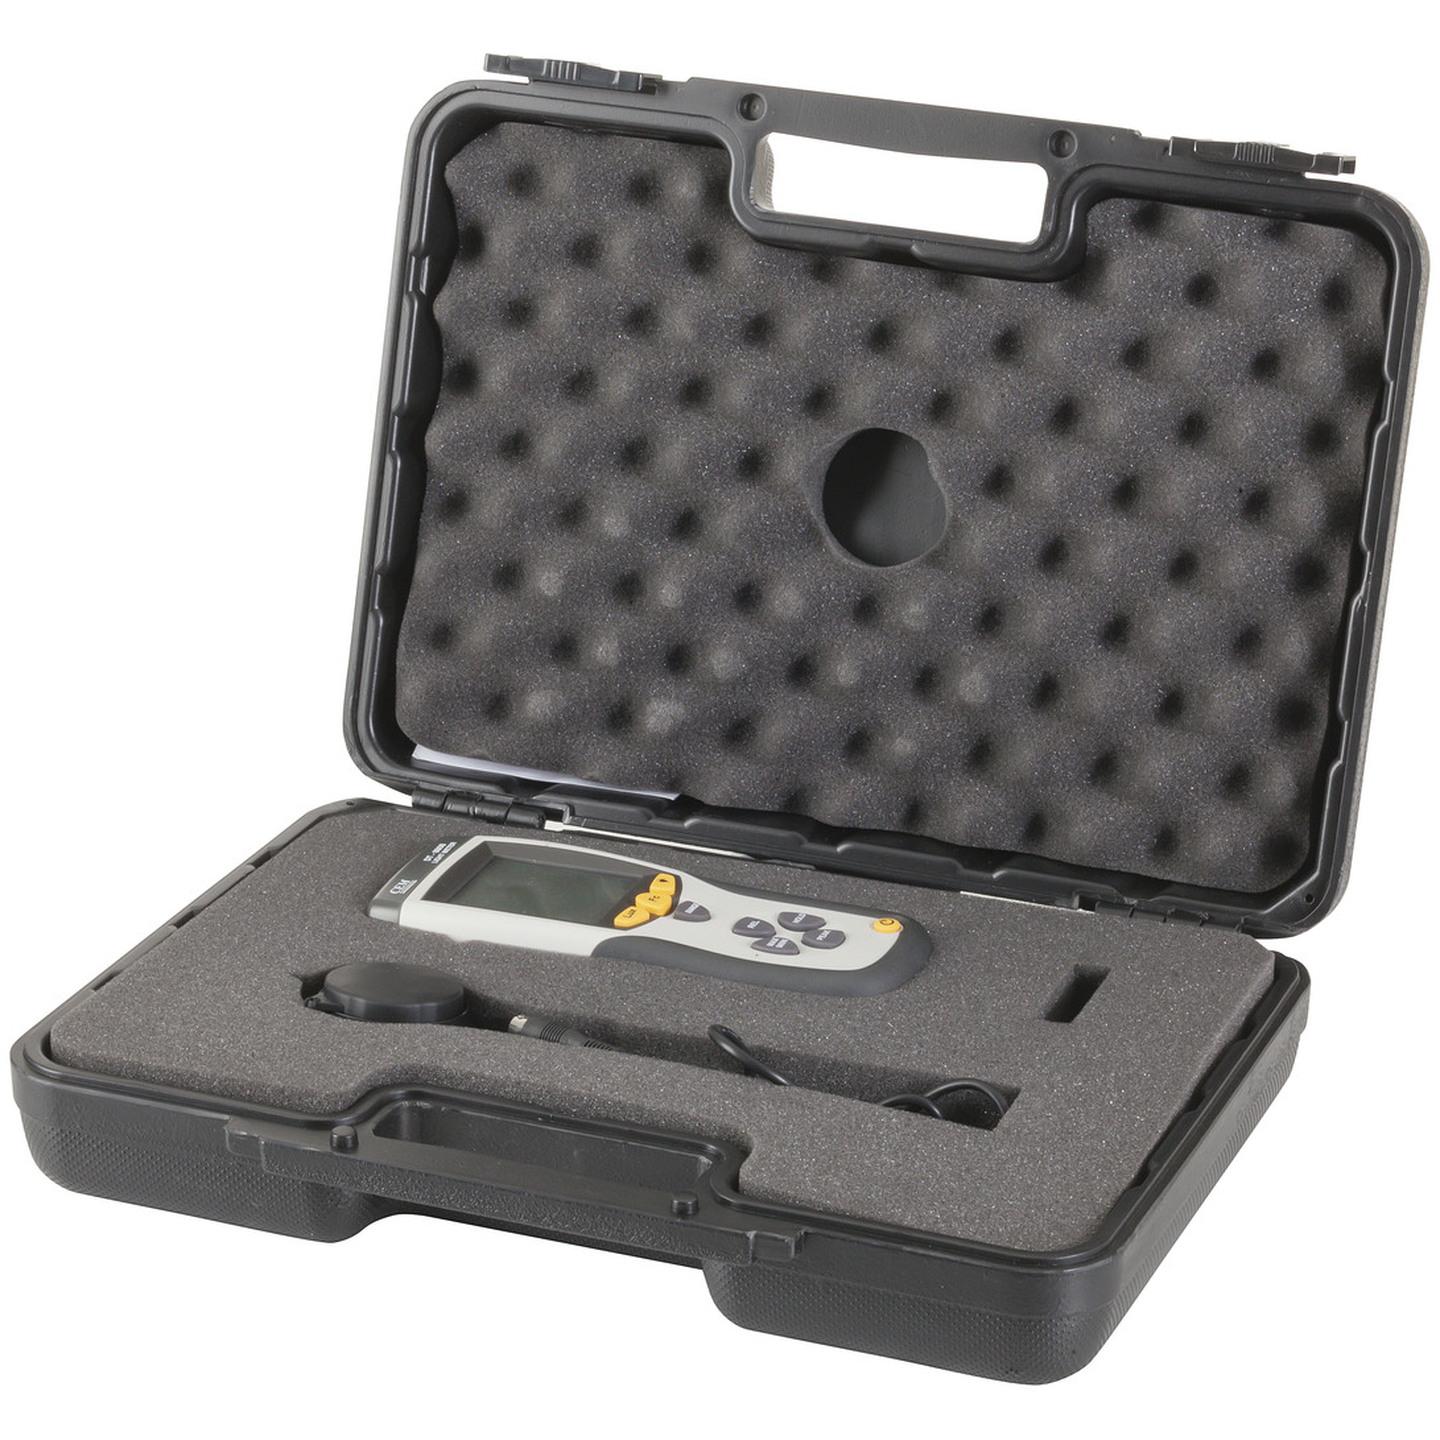 Professional 400K Lux Meter with Carry Case